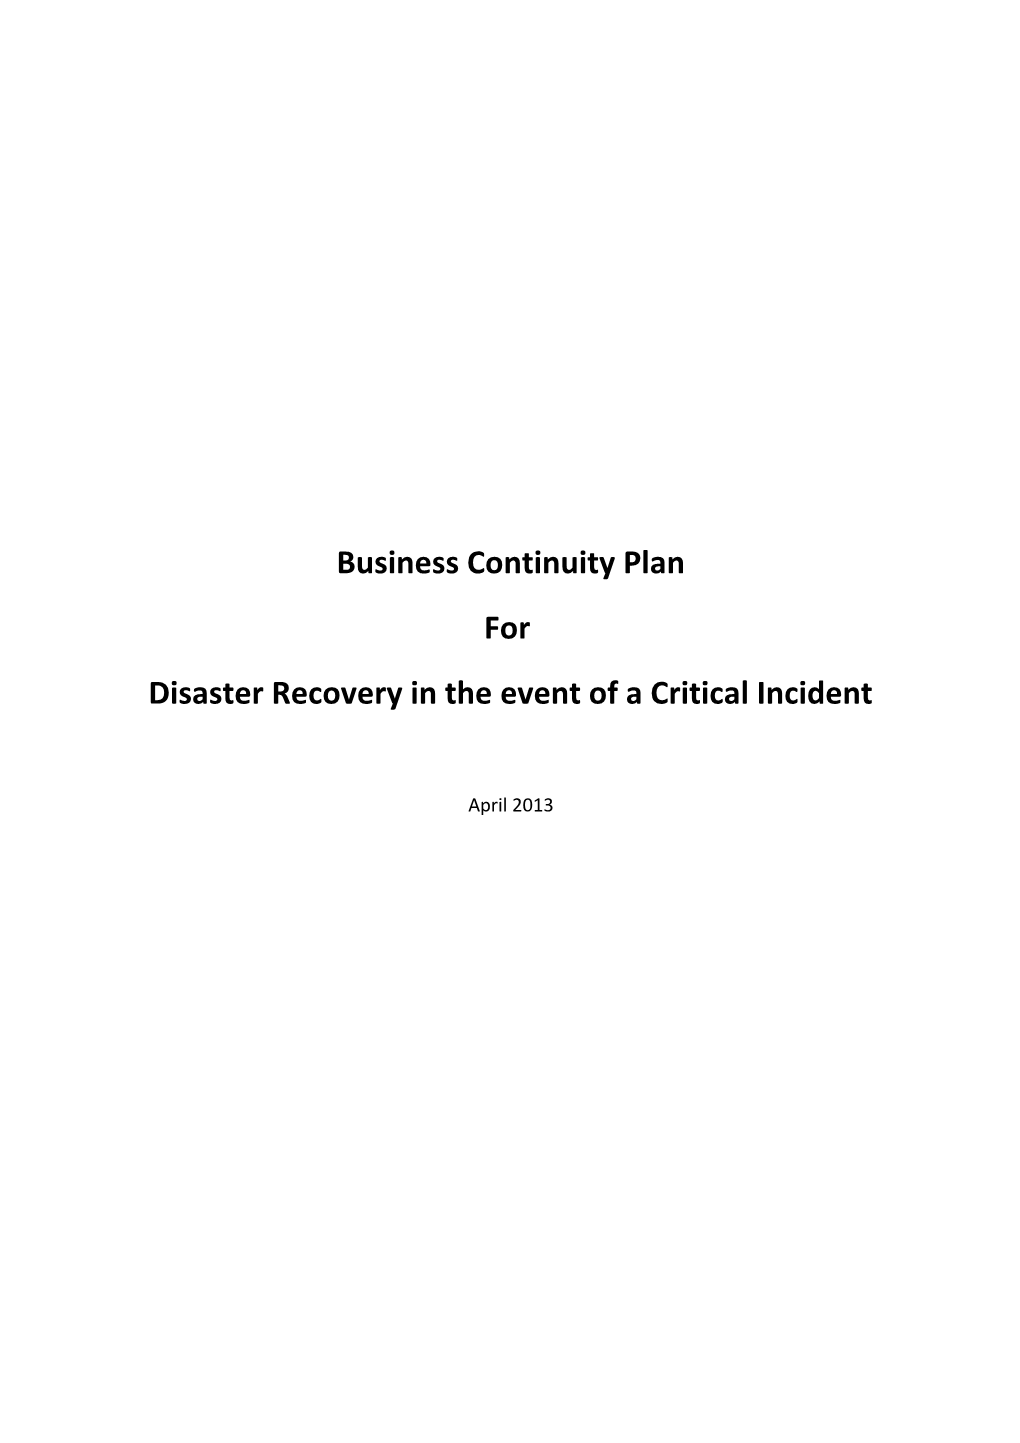 Disaster Recoveryin the Event of a Critical Incident